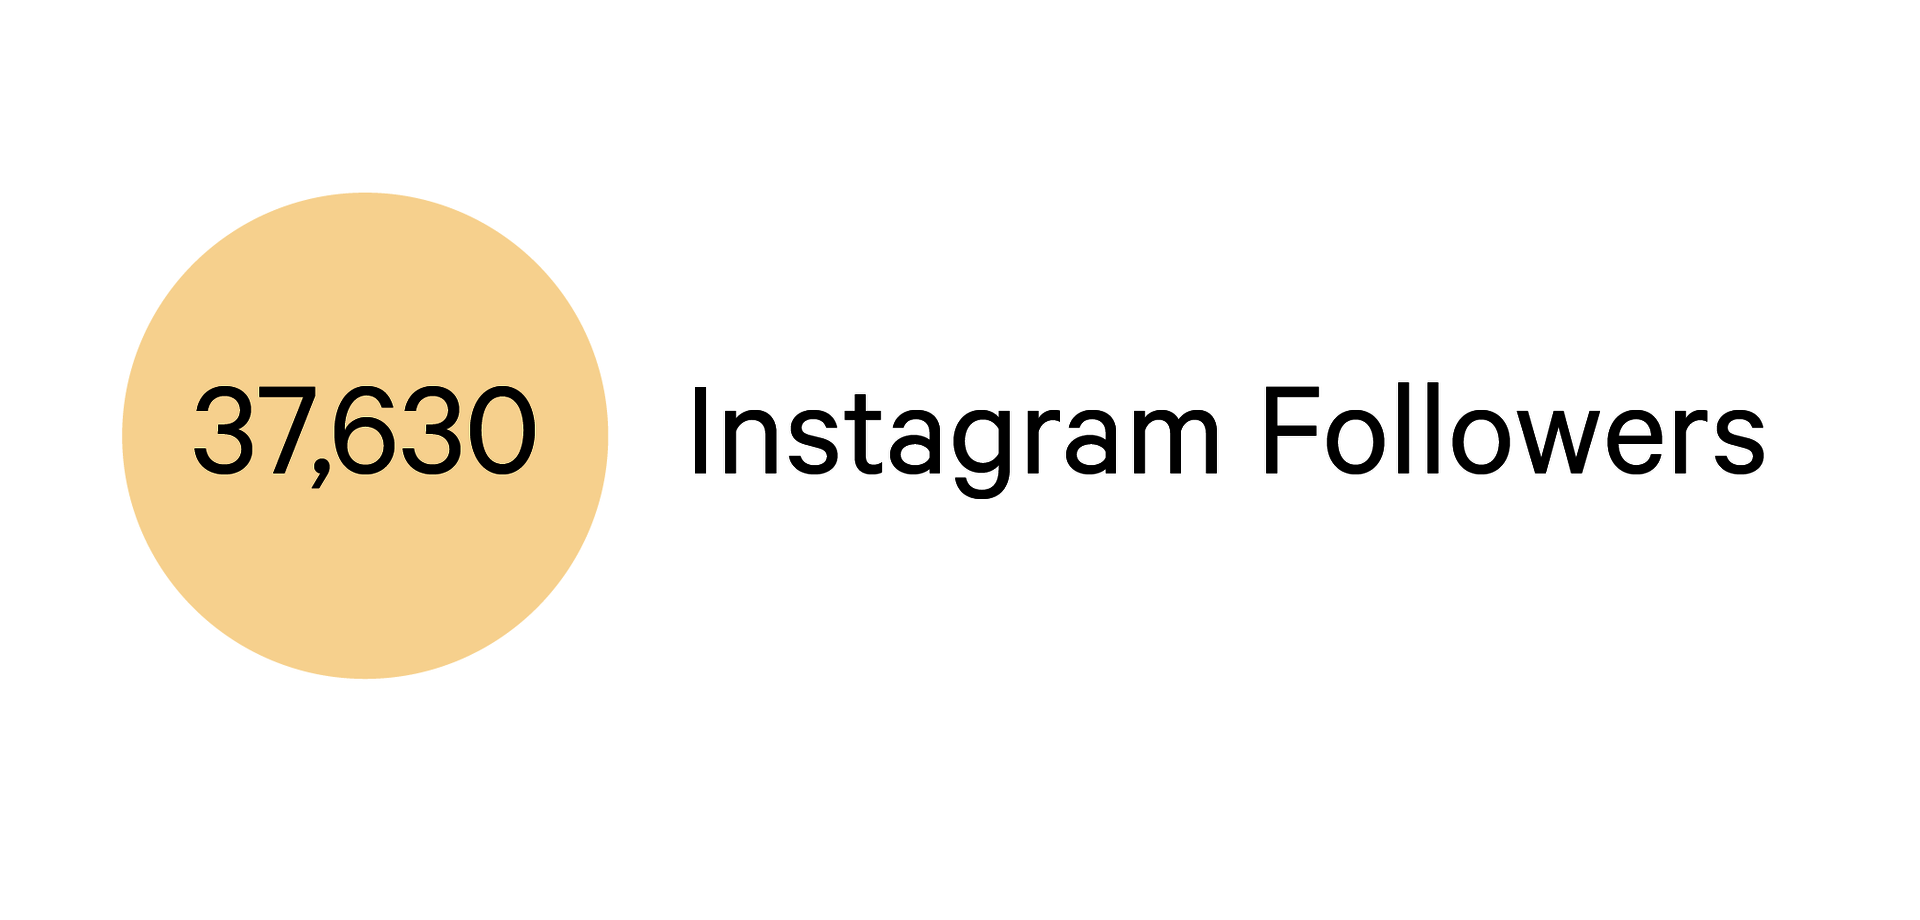 Pale yellow circle with text that says: “37,630 Instagram Followers.”